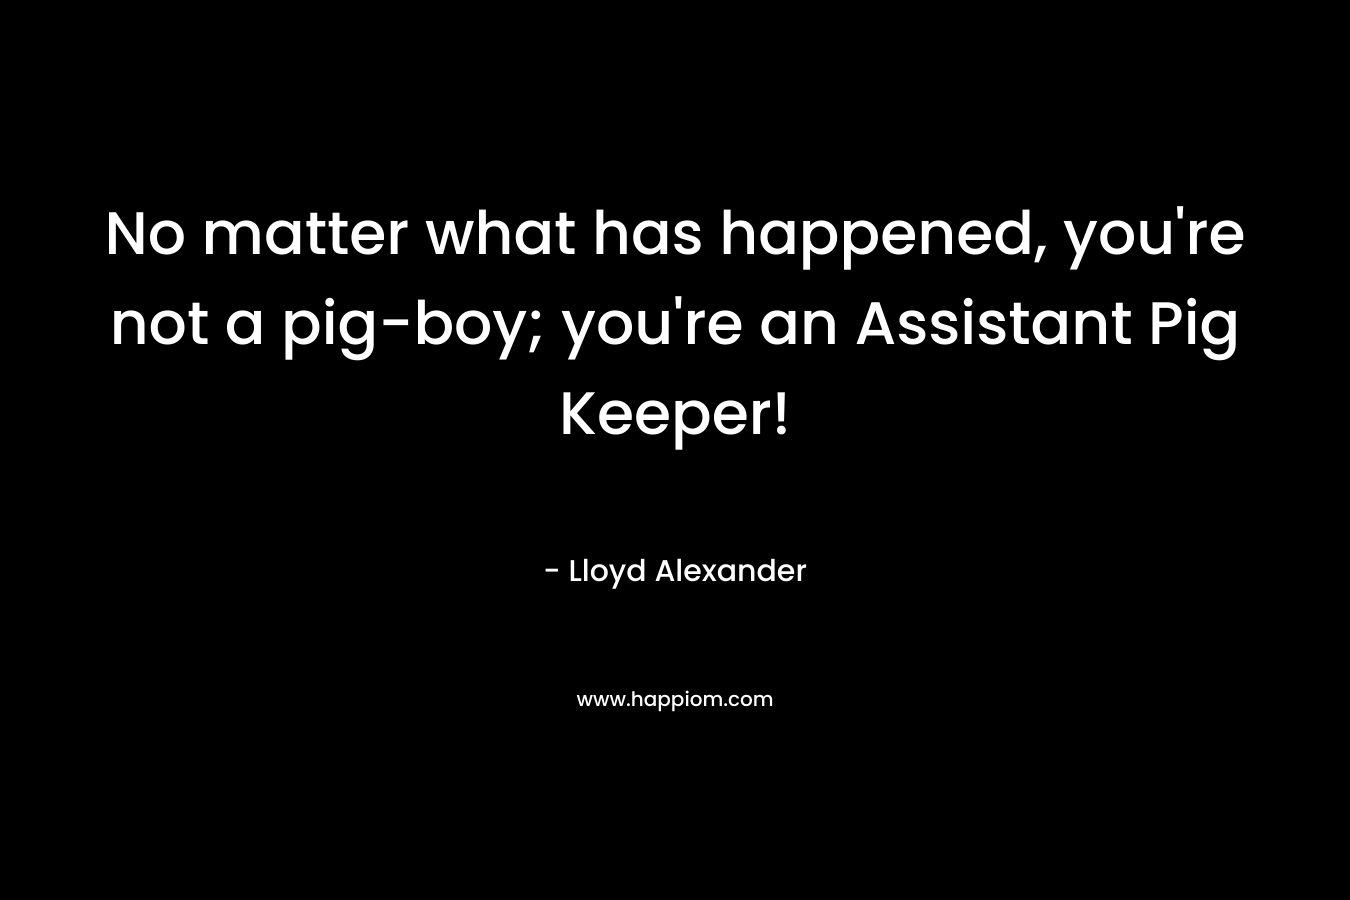 No matter what has happened, you’re not a pig-boy; you’re an Assistant Pig Keeper! – Lloyd Alexander